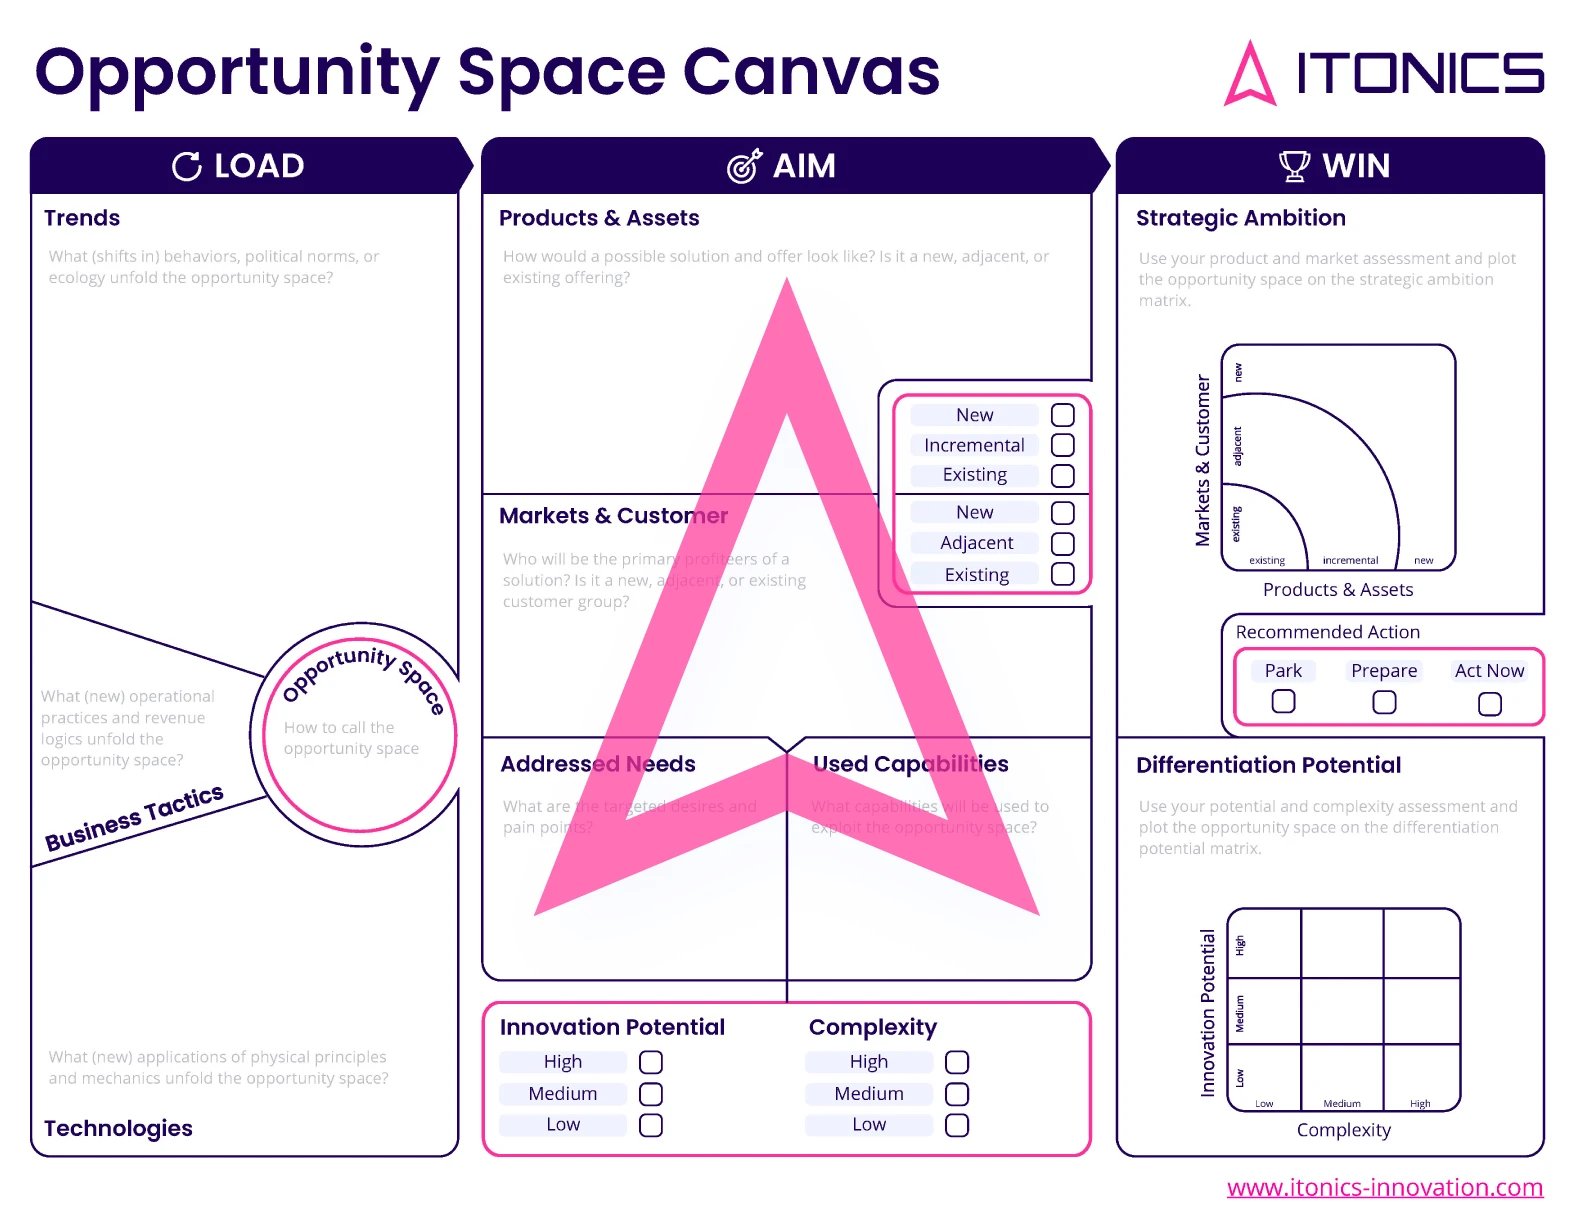 ITONICS Opportunity Space Canvas Template